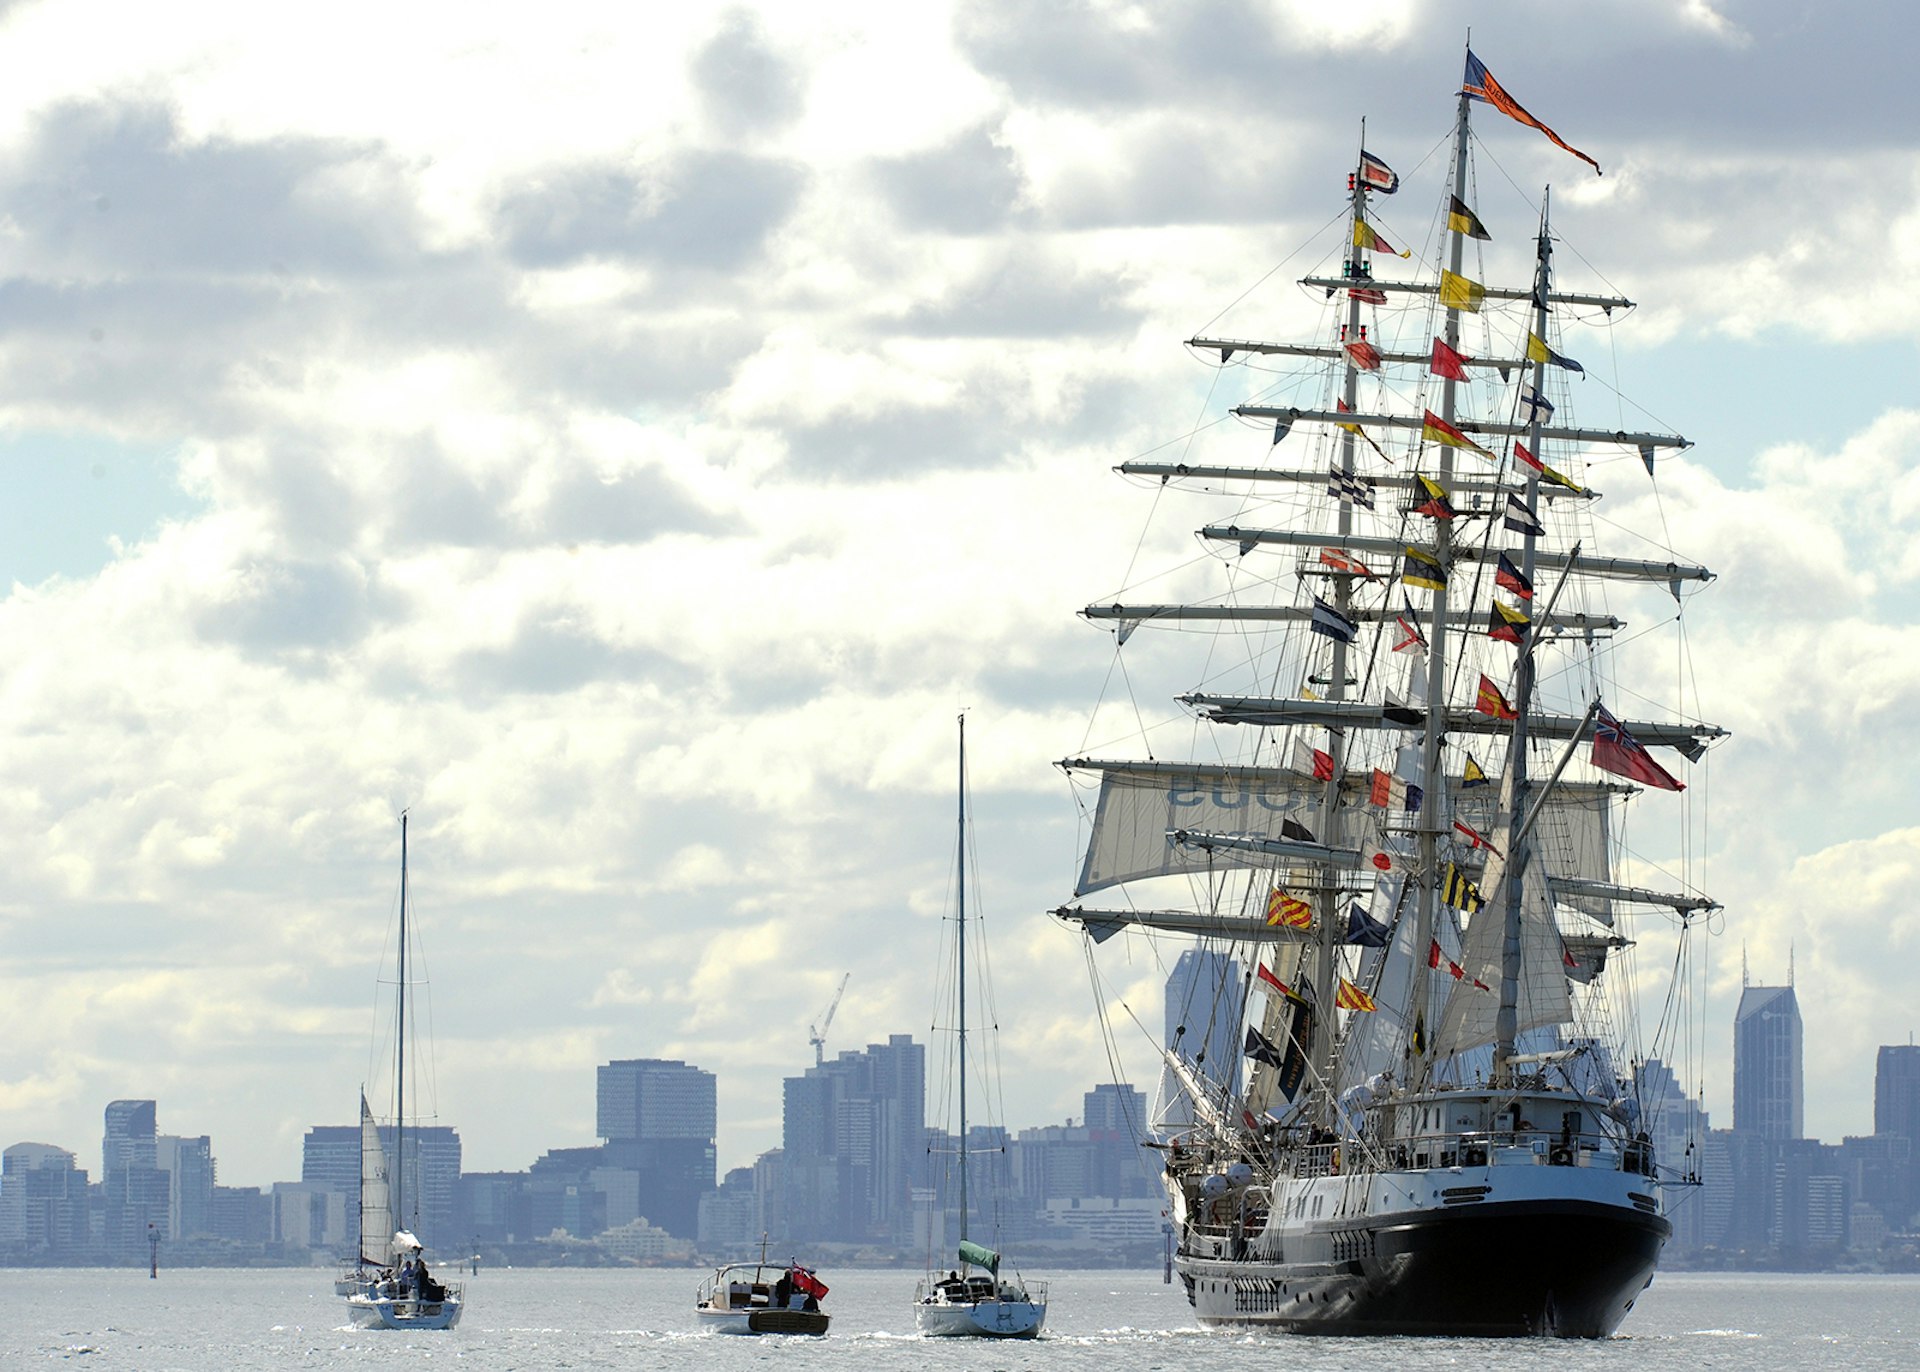 The SV Tenacious approaching Melbourne / Image courtesy of the Jubilee Sailing Trust